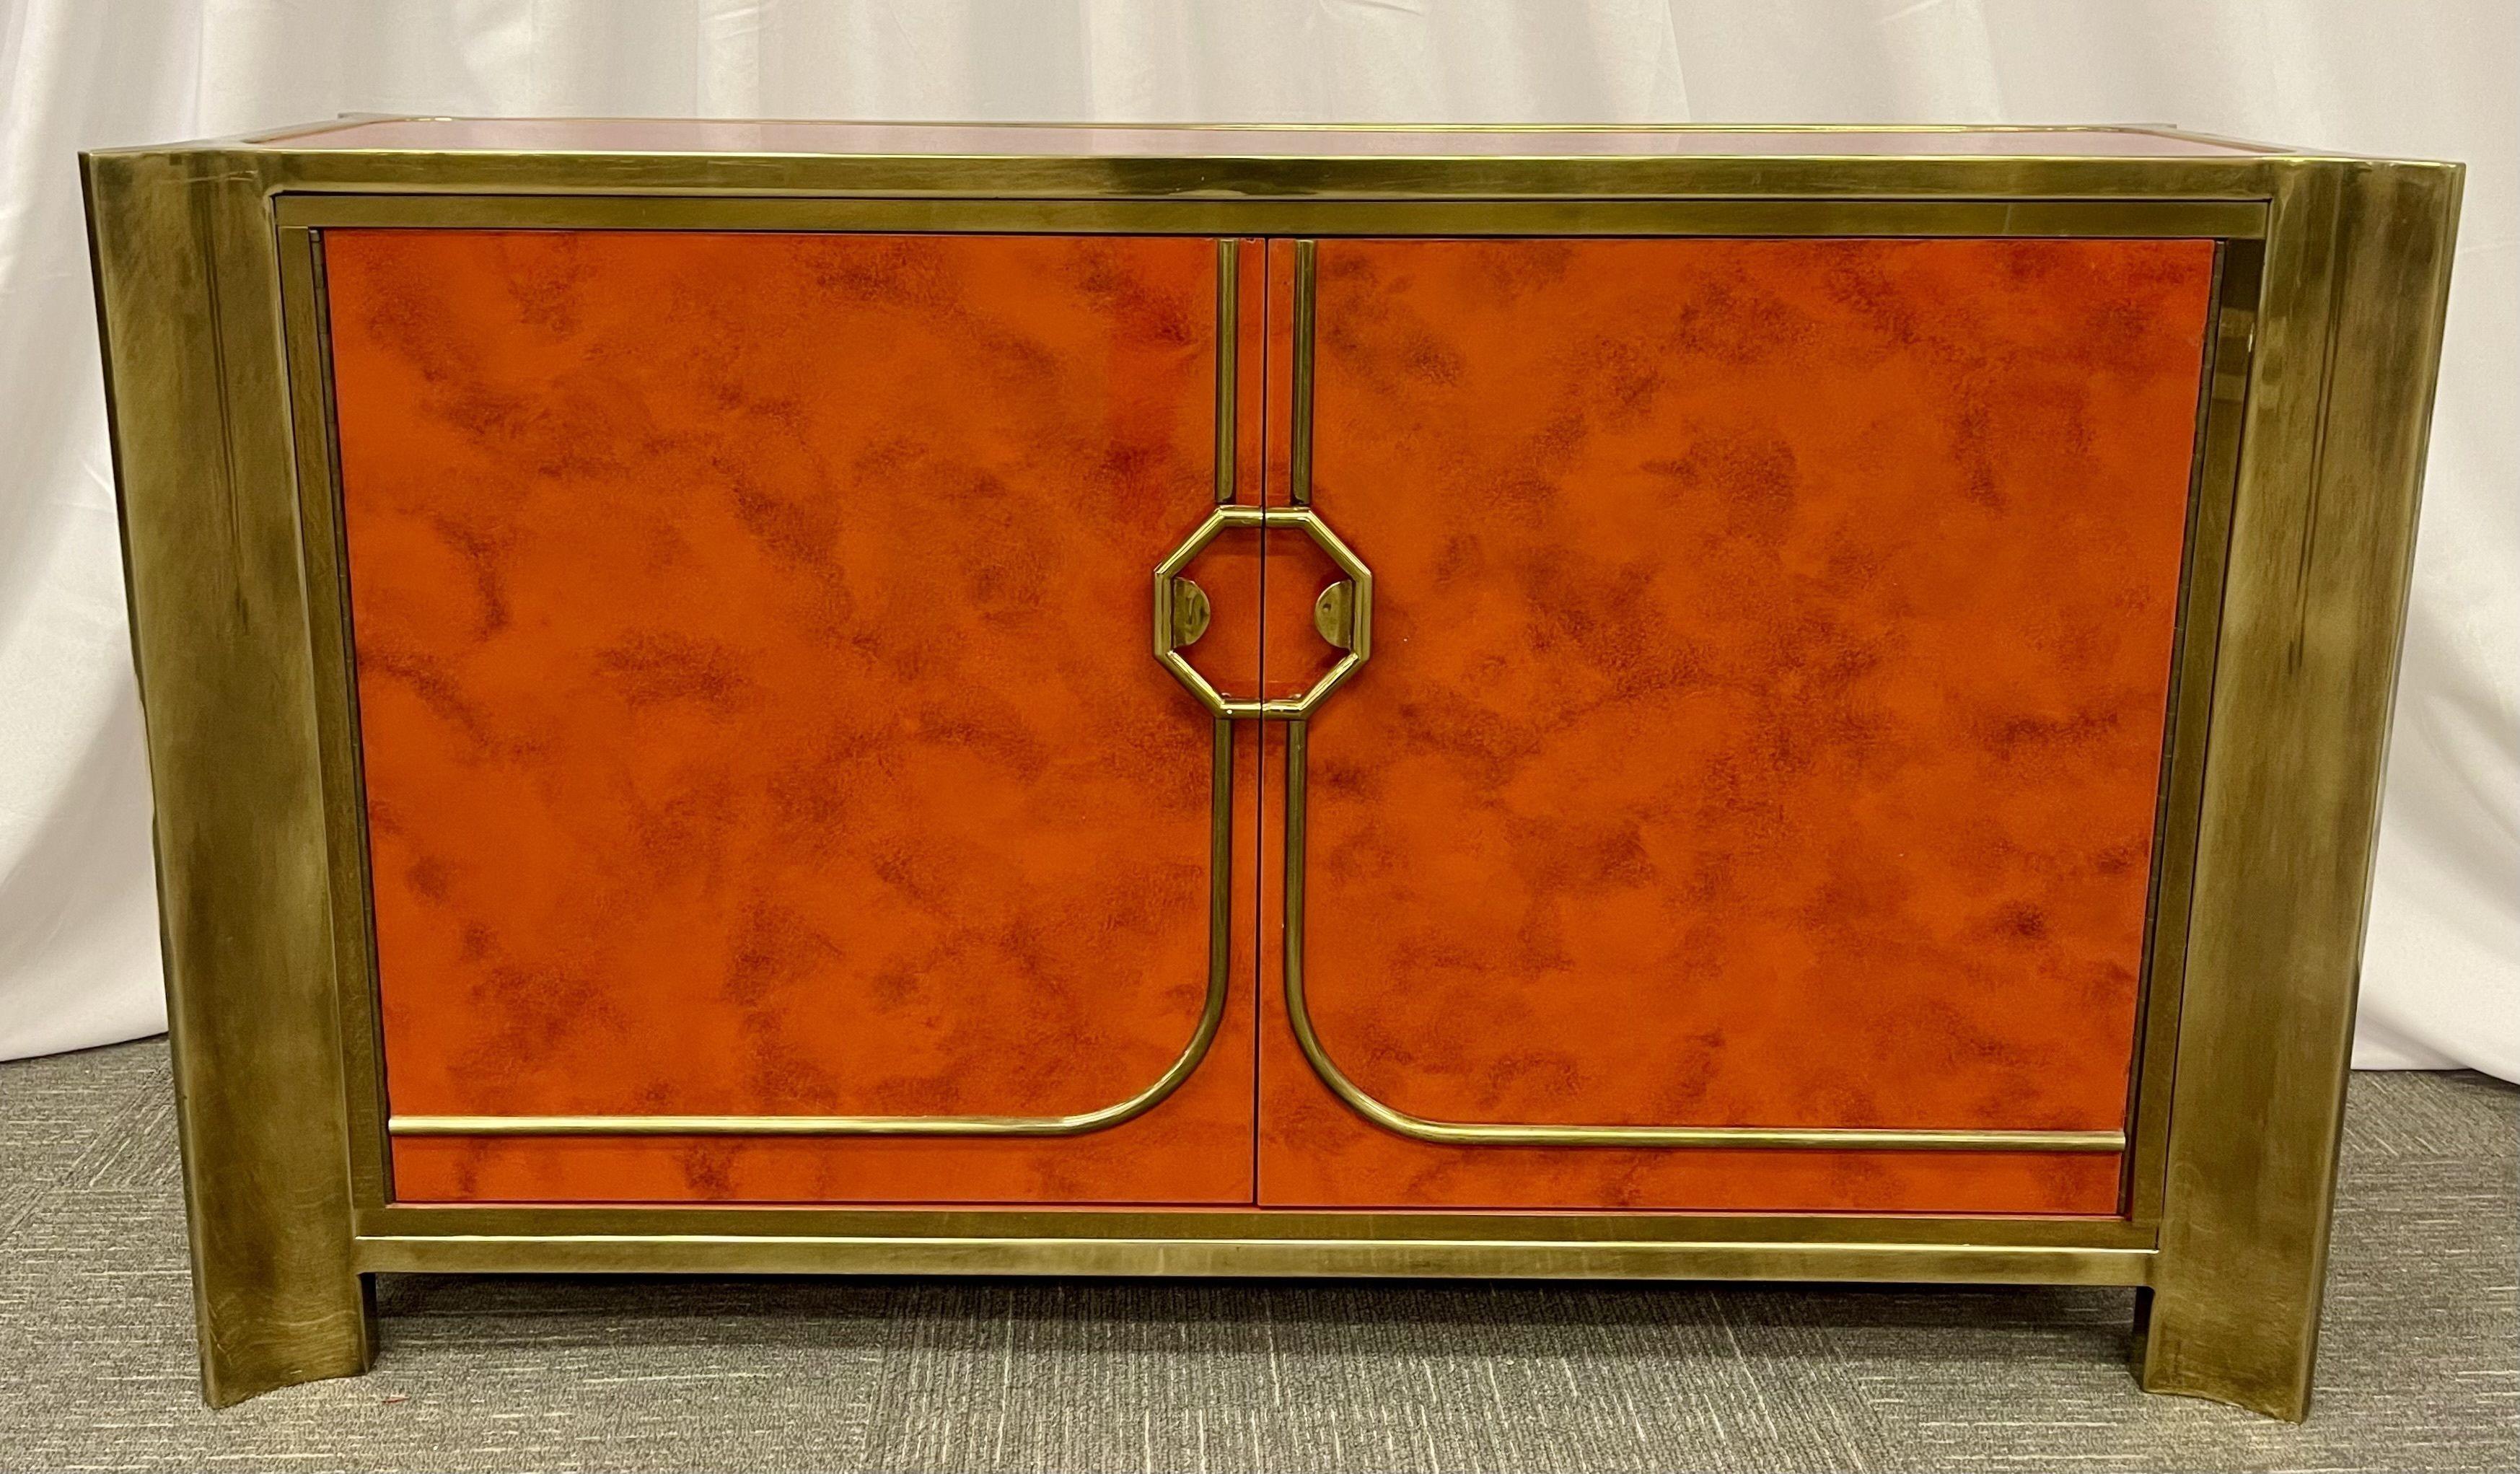 Late 20th Century Mid-Century Modern Small Cabinet by Mastercraft, Lacquer, Brass, American, 1980s For Sale